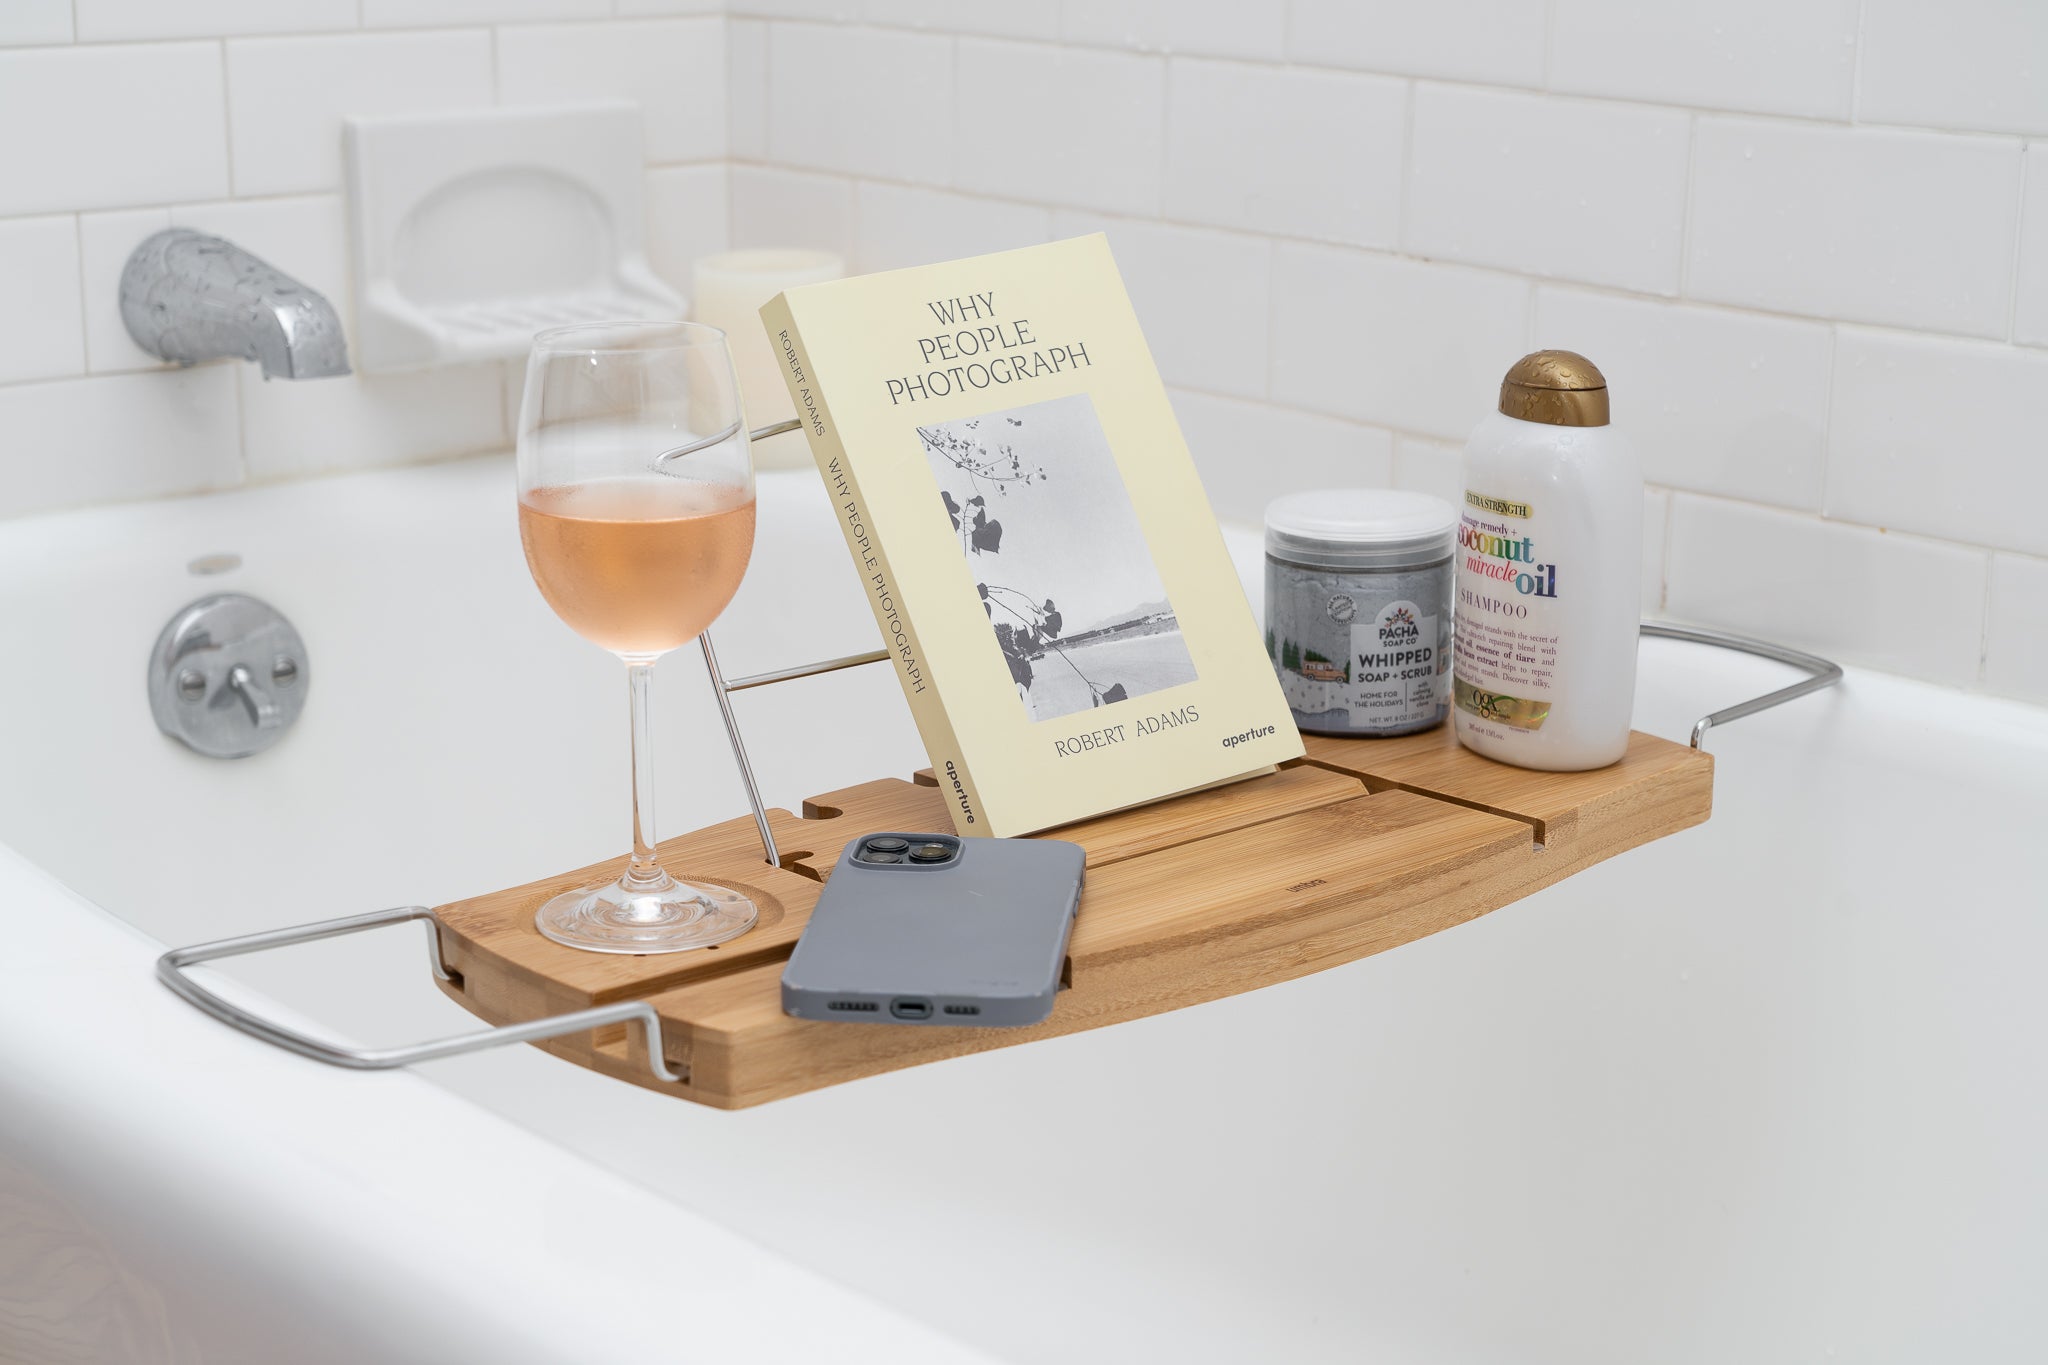 How to Decorate a Bathtub Tray